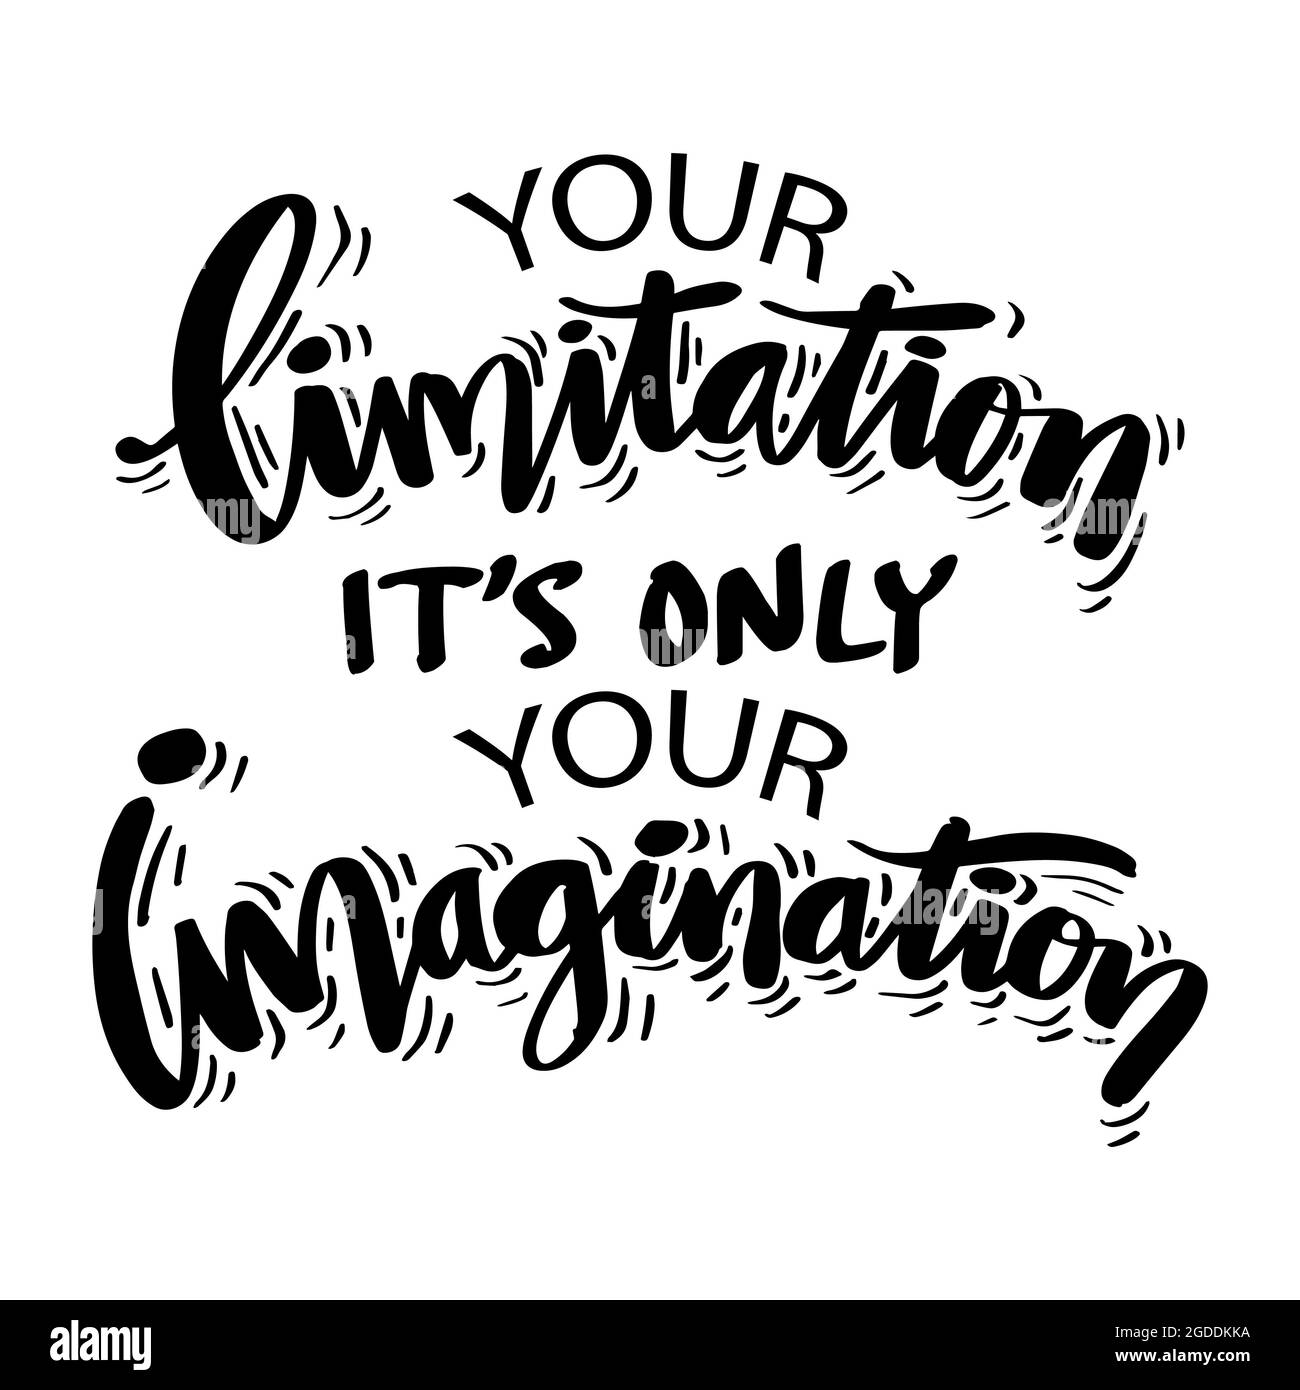 You limitation it's only your imagination. Motivational quote. Stock Photo